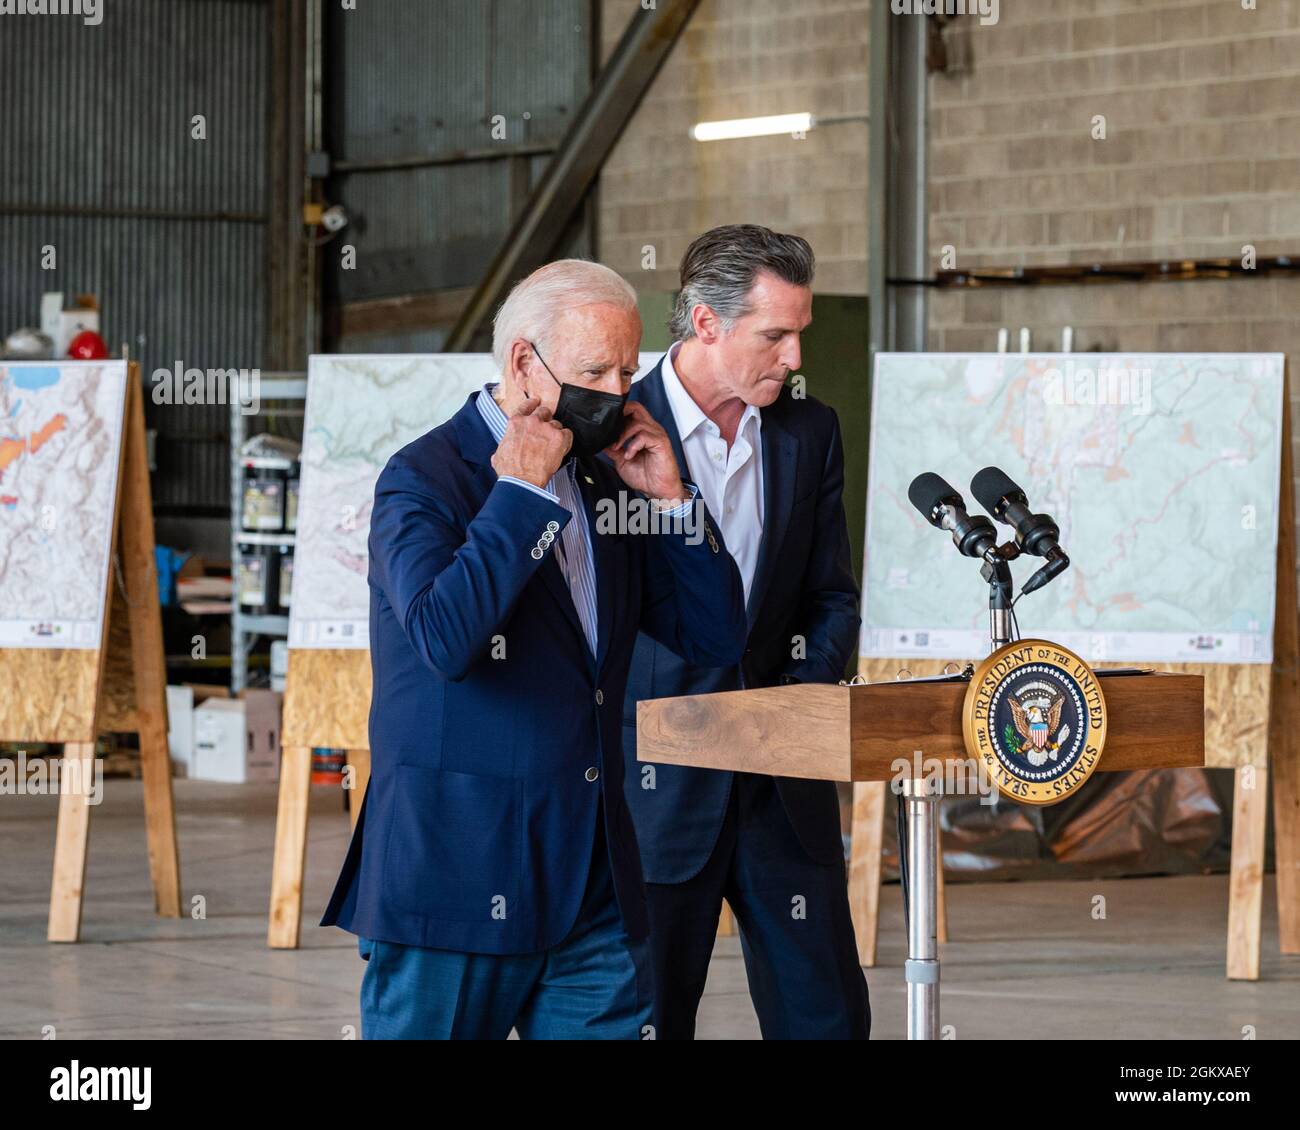 President Biden moves up to a podium at a press conference, removing his mask, after Governor Gavin Newsom has finished speaking. Stock Photo